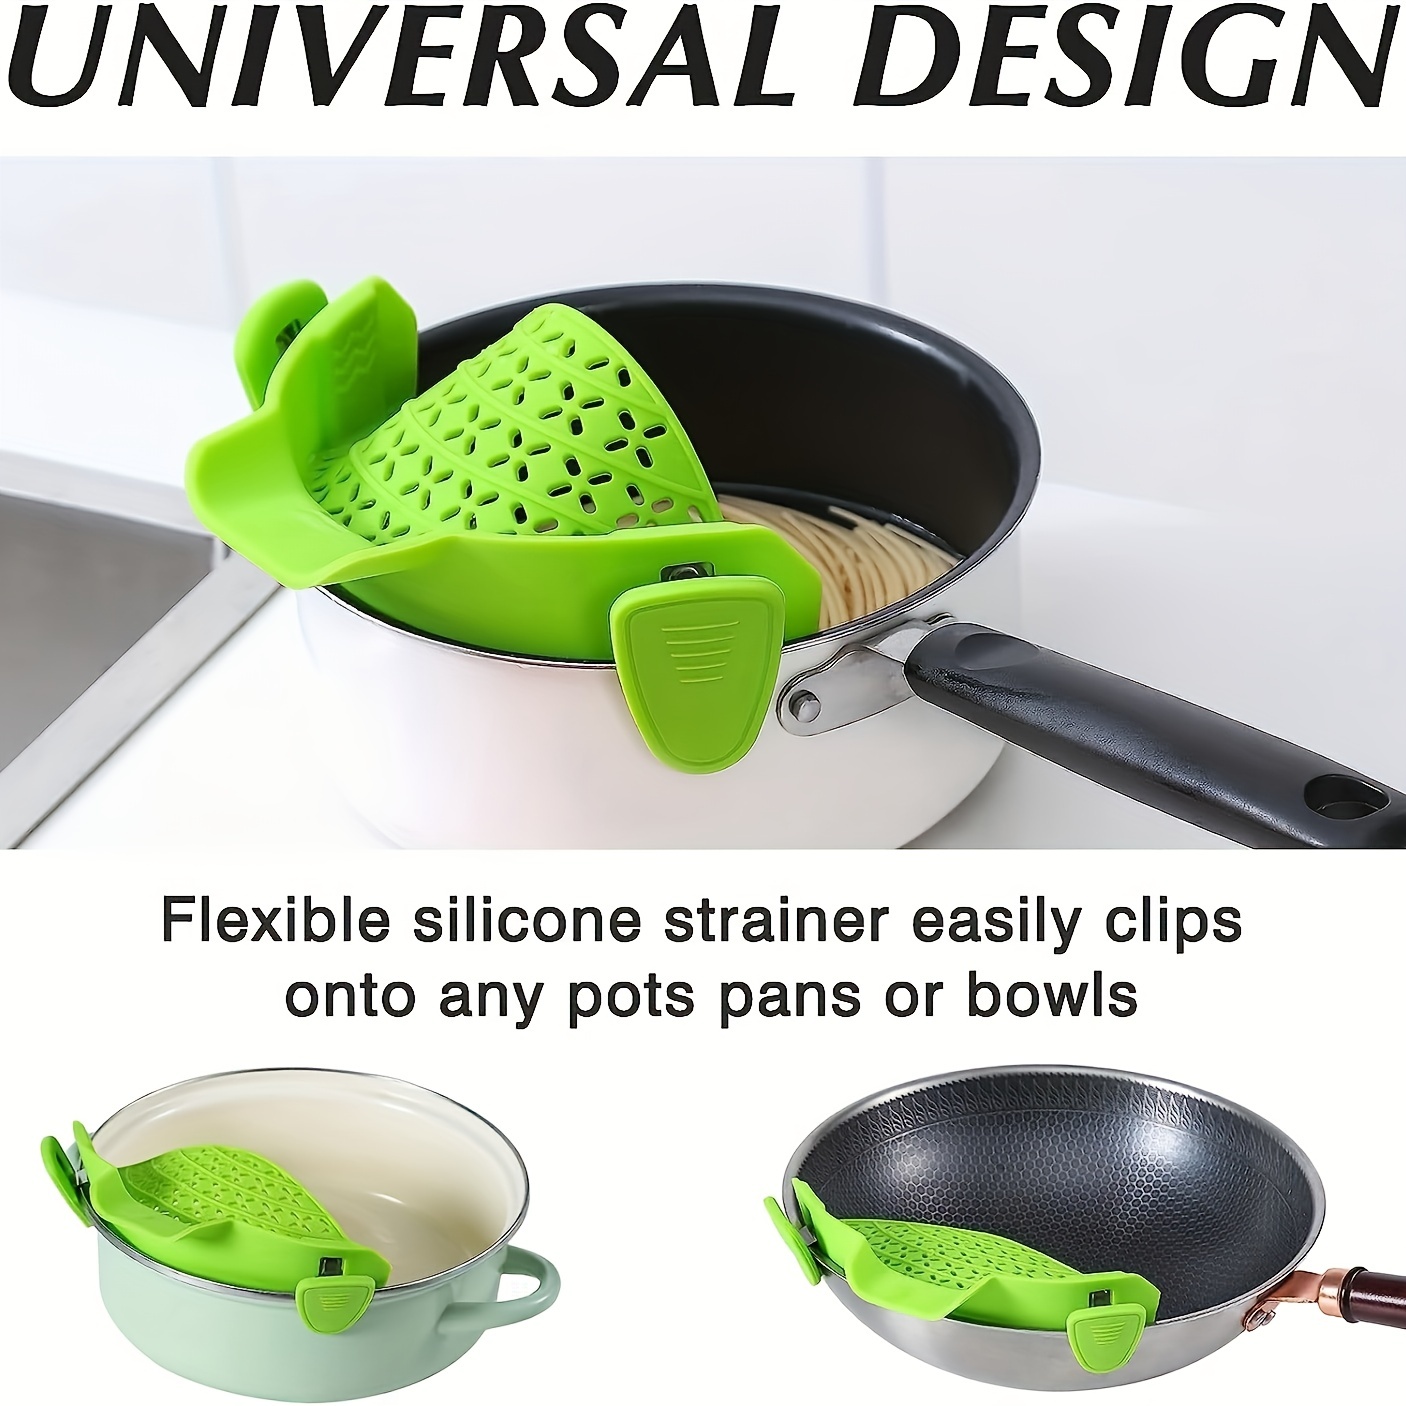 Food strainers & colanders,Adjustable Silicone Clip On Strainer for Pots,  Pans, and Bowls, cooking gadgets, kitchen essentials for new home, cool